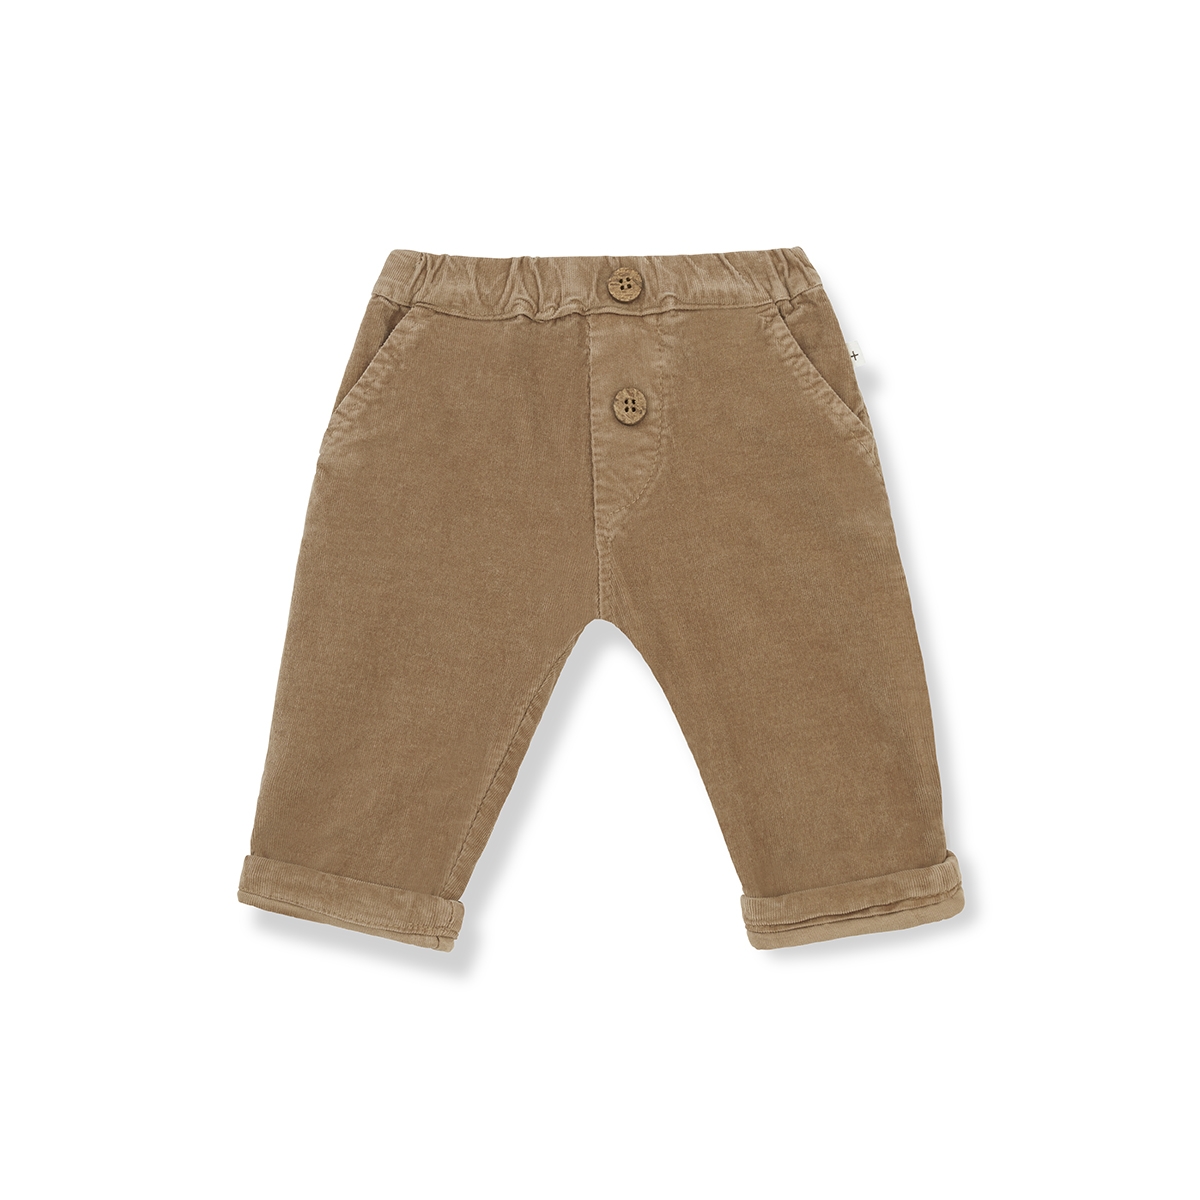 1 + in the family Artal trousers brown AW21-ARTAL-BRANDY 